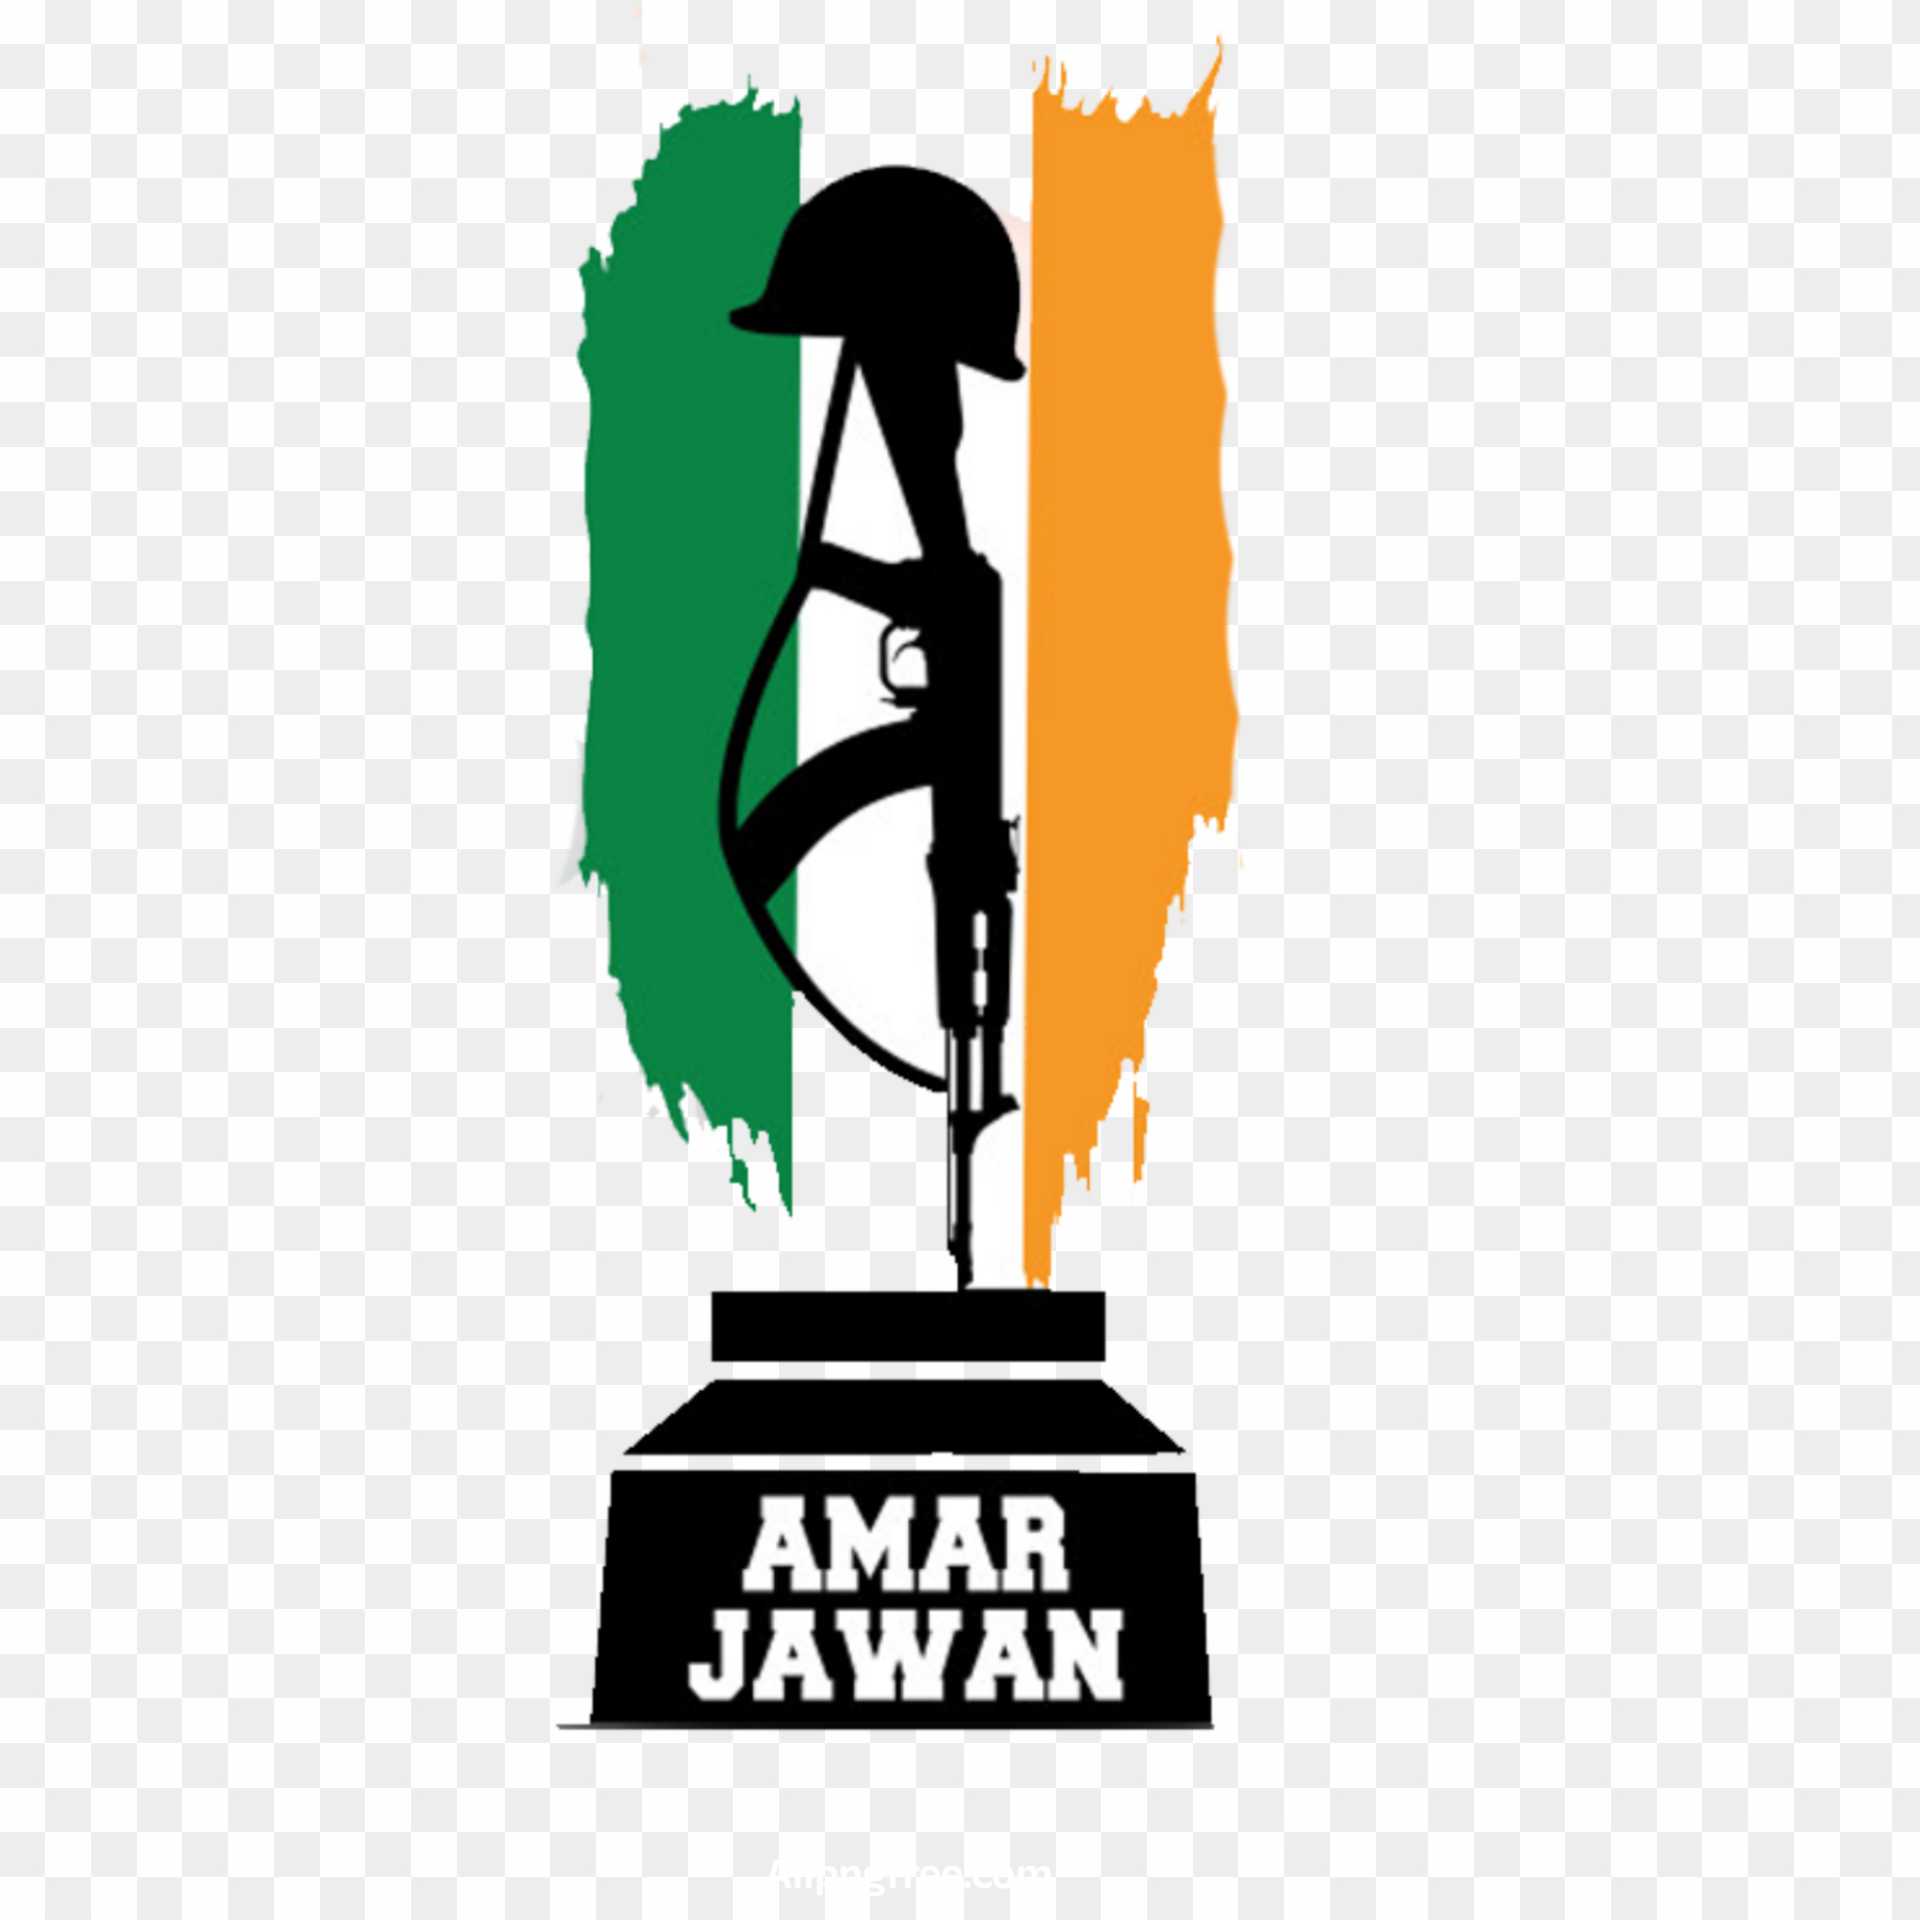 Indian army Shahid Veer Jawan PNG images download